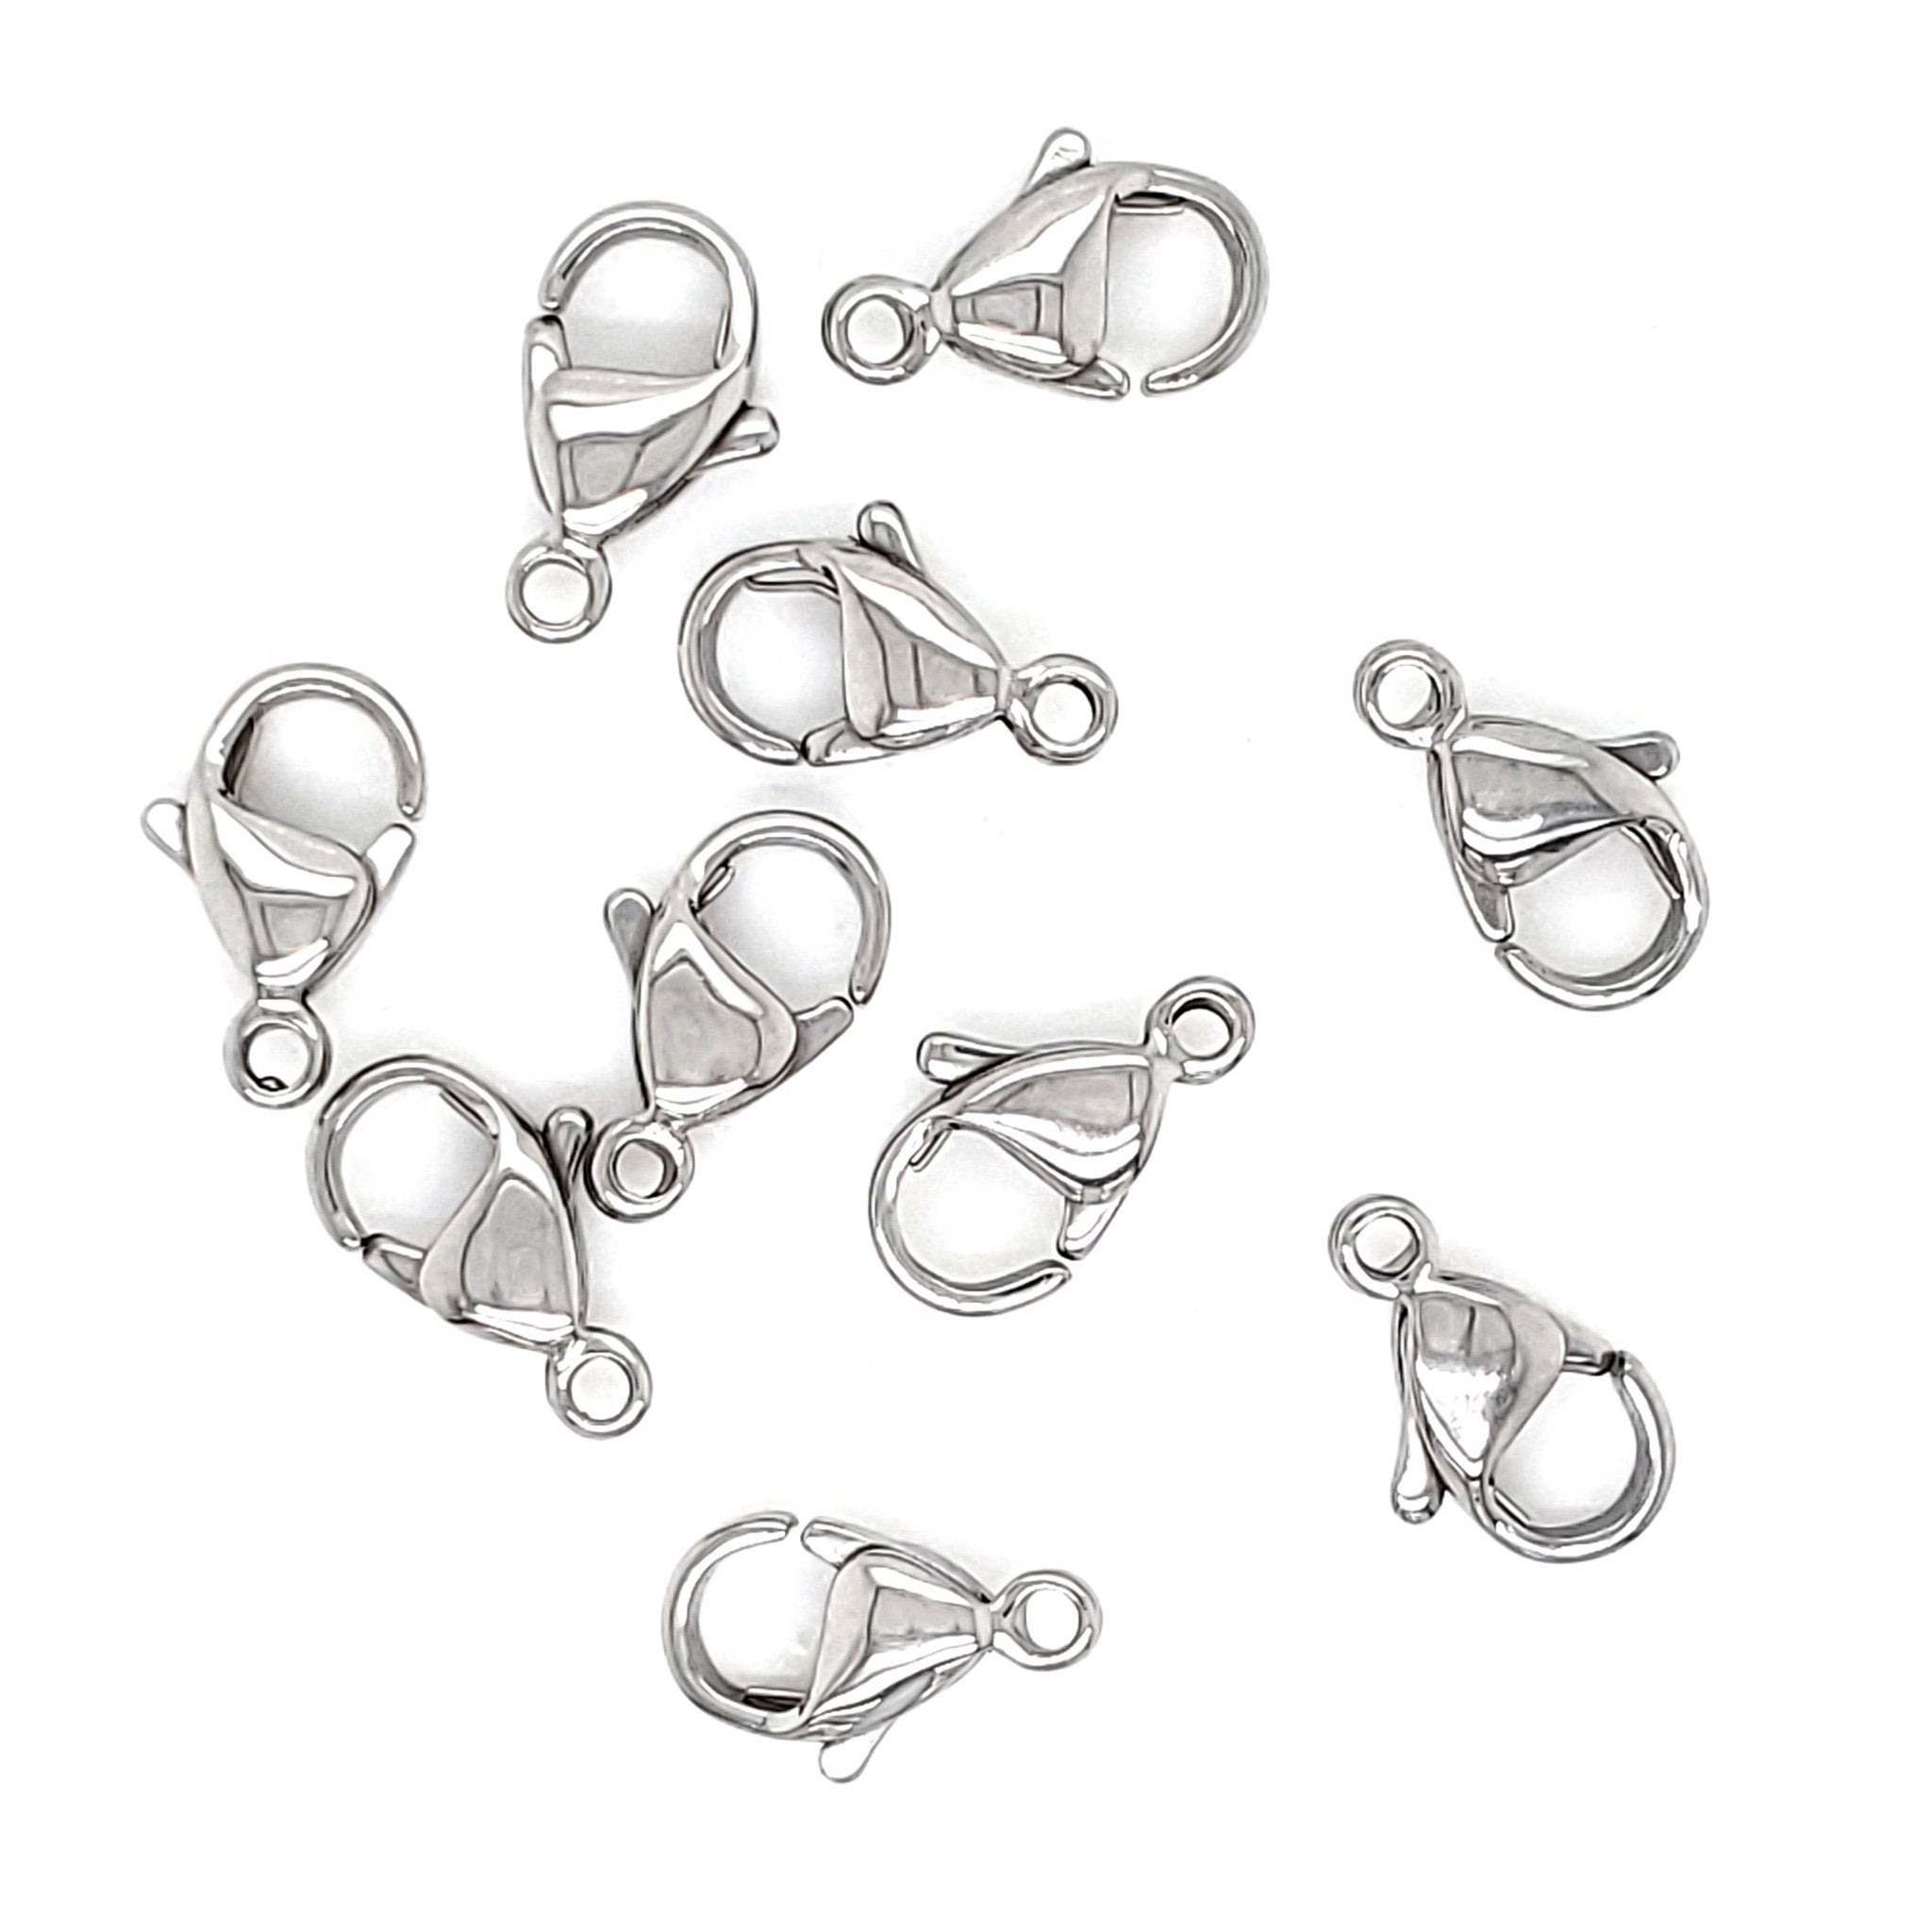 Wholesale SUNNYCLUE 1 Box 240Pcs Lobster Clasps Lobster Clasp Bulk 304  Stainless Steel Lobster Claw Clasps Necklace Bracelet Clasp Fasteners Hook  Lobster Claw Clasp for Jewelry Making Women DIY Craft Supplies 